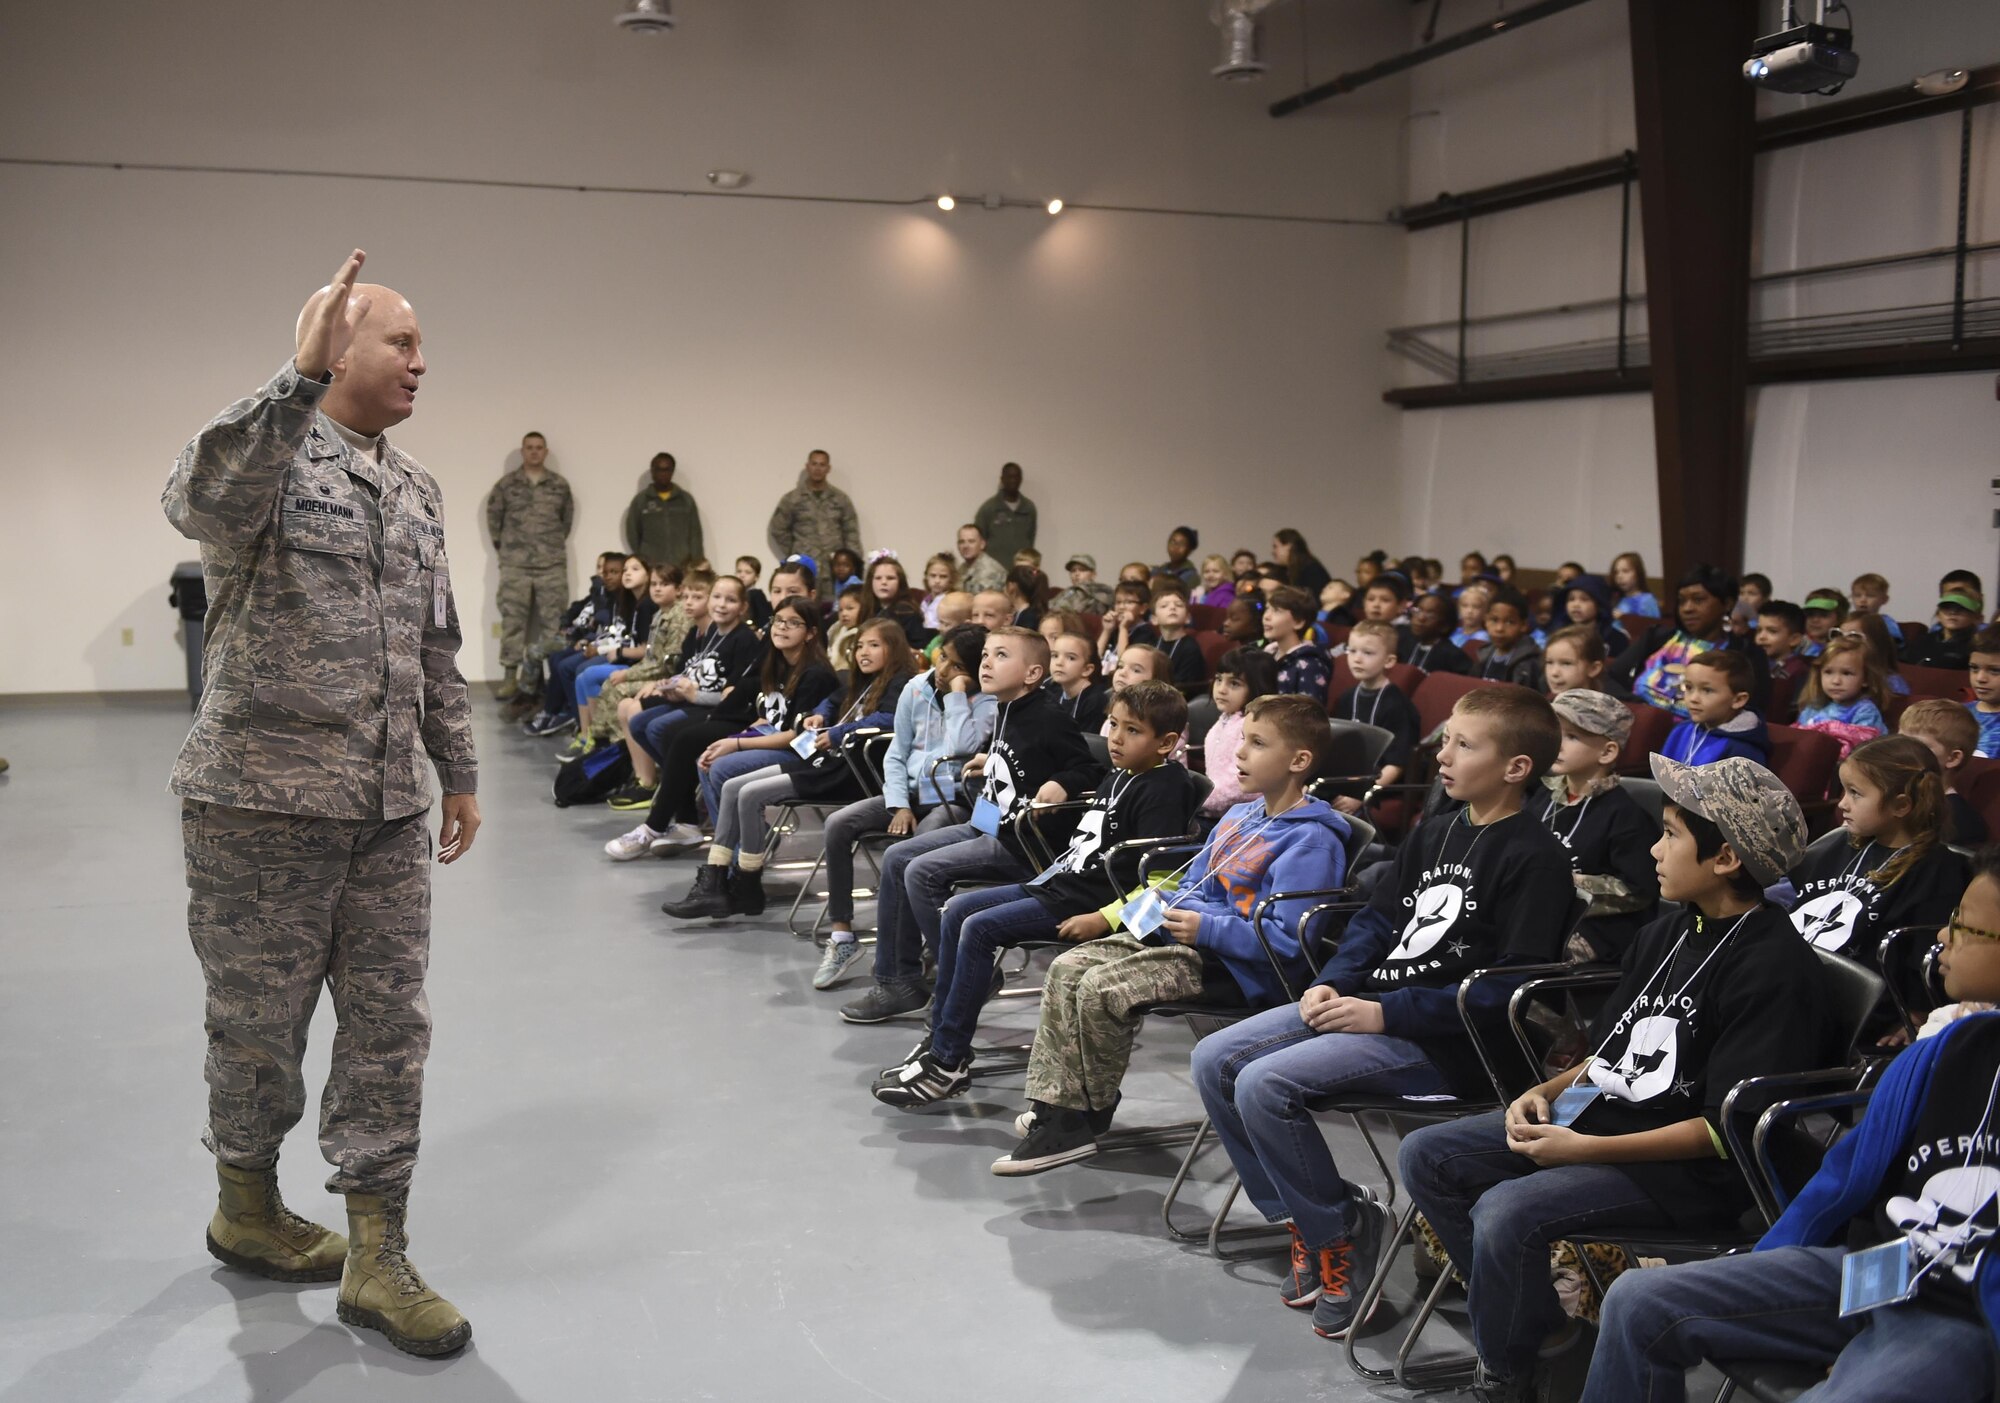 Colonel Joseph Moehlmann, the 635th Materiel Maintenance Group commander, briefs a group of children during Operation Kids Investigating Deployment at Holloman Air Force Base, N.M., Feb. 3, 2017. Operation KID is an annual event allowing children of military members to acquire a better understanding of what their parent goes through prior to a deployment. Military children were given a walk around the Basic Expeditionary Airfield Resources compound to see a mock deployment site, a mission brief, painted their faces, tried on Mission Oriented Protective Posture gear, and learn about different equipment including the opportunity to see a robot demonstration from Holloman’s Explosive Ordnance Disposal unit. (U.S. Air Force photo by Staff Sgt. Stacy Jonsgaard)